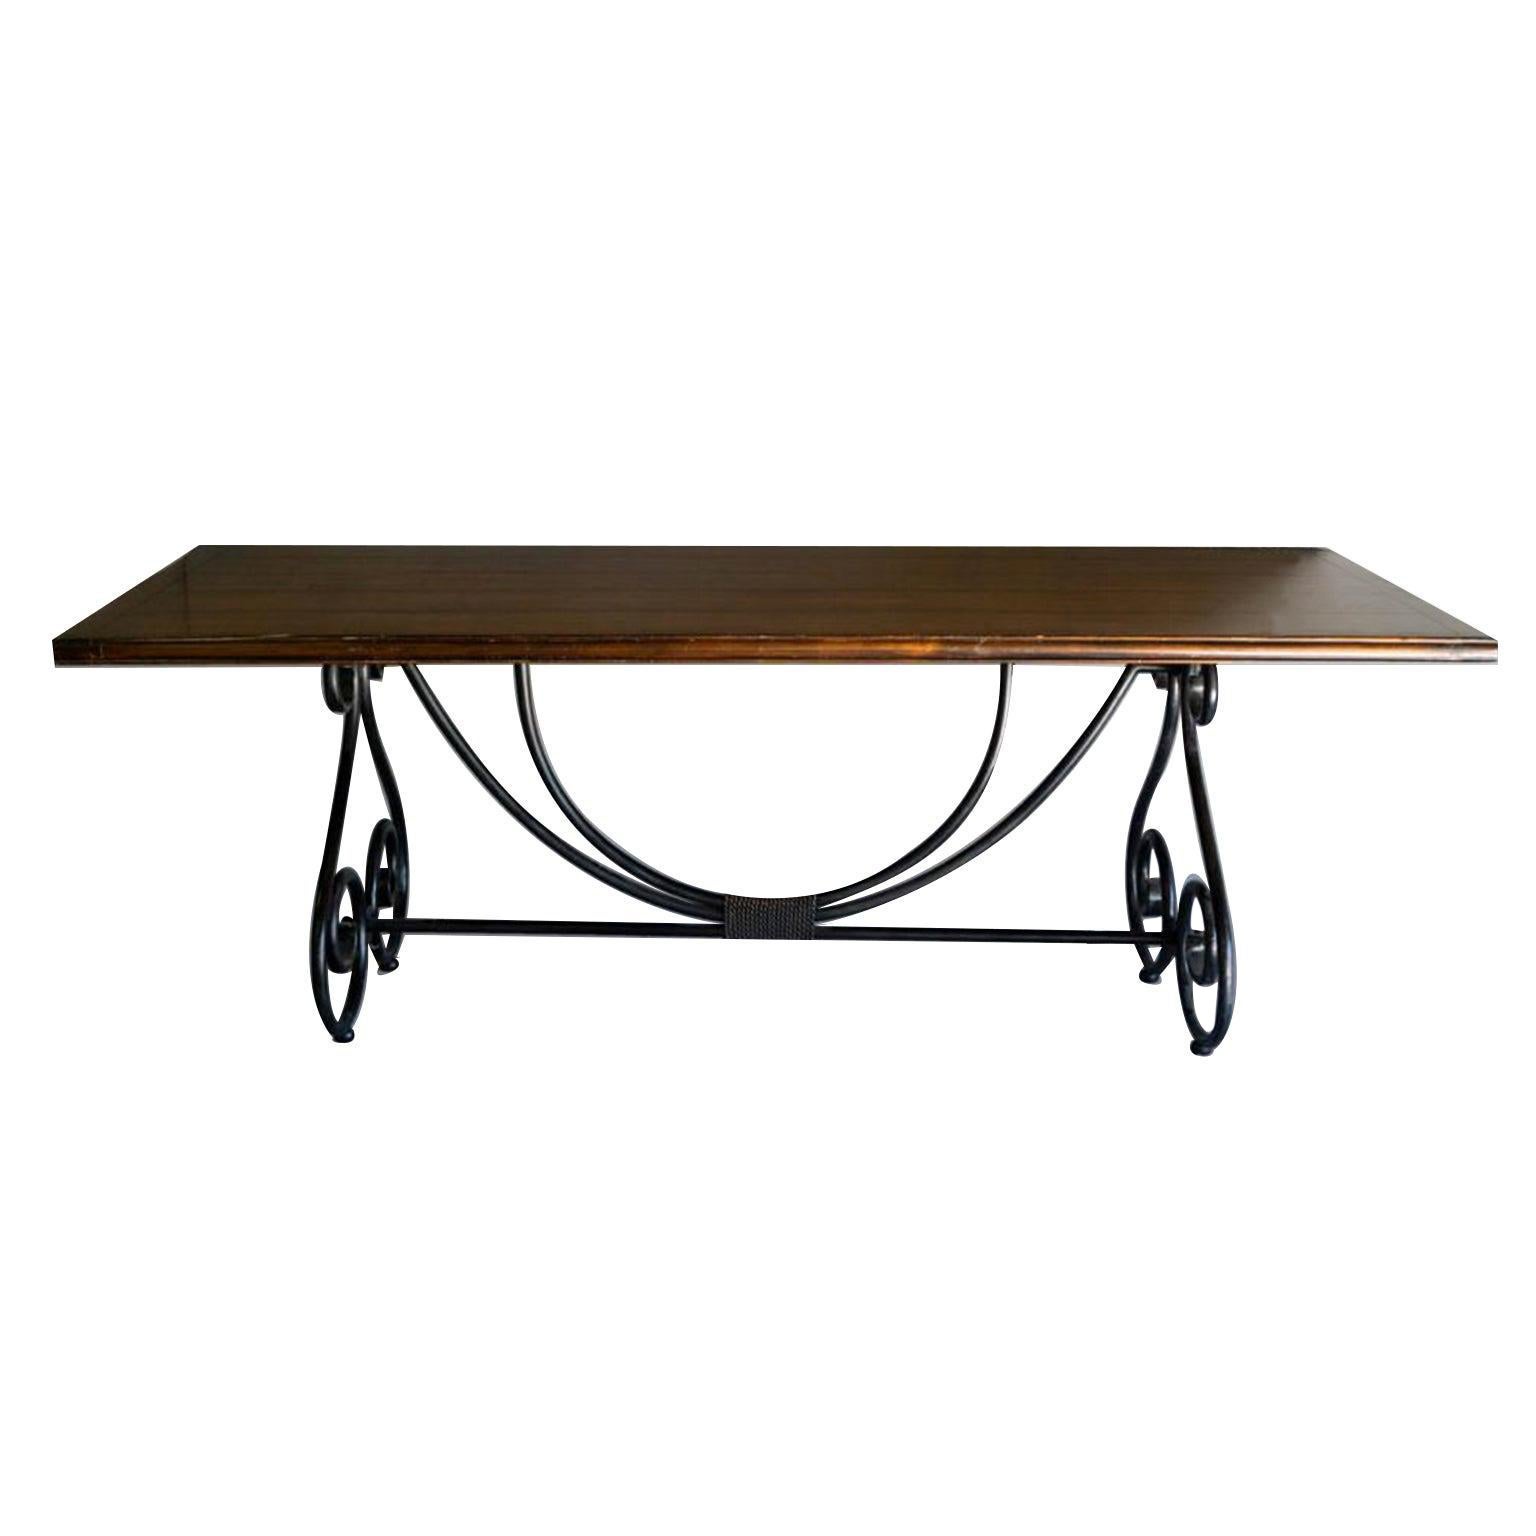 Ebony Metal and Brass Scroll Base Dining Table Wood Top Baroque Style